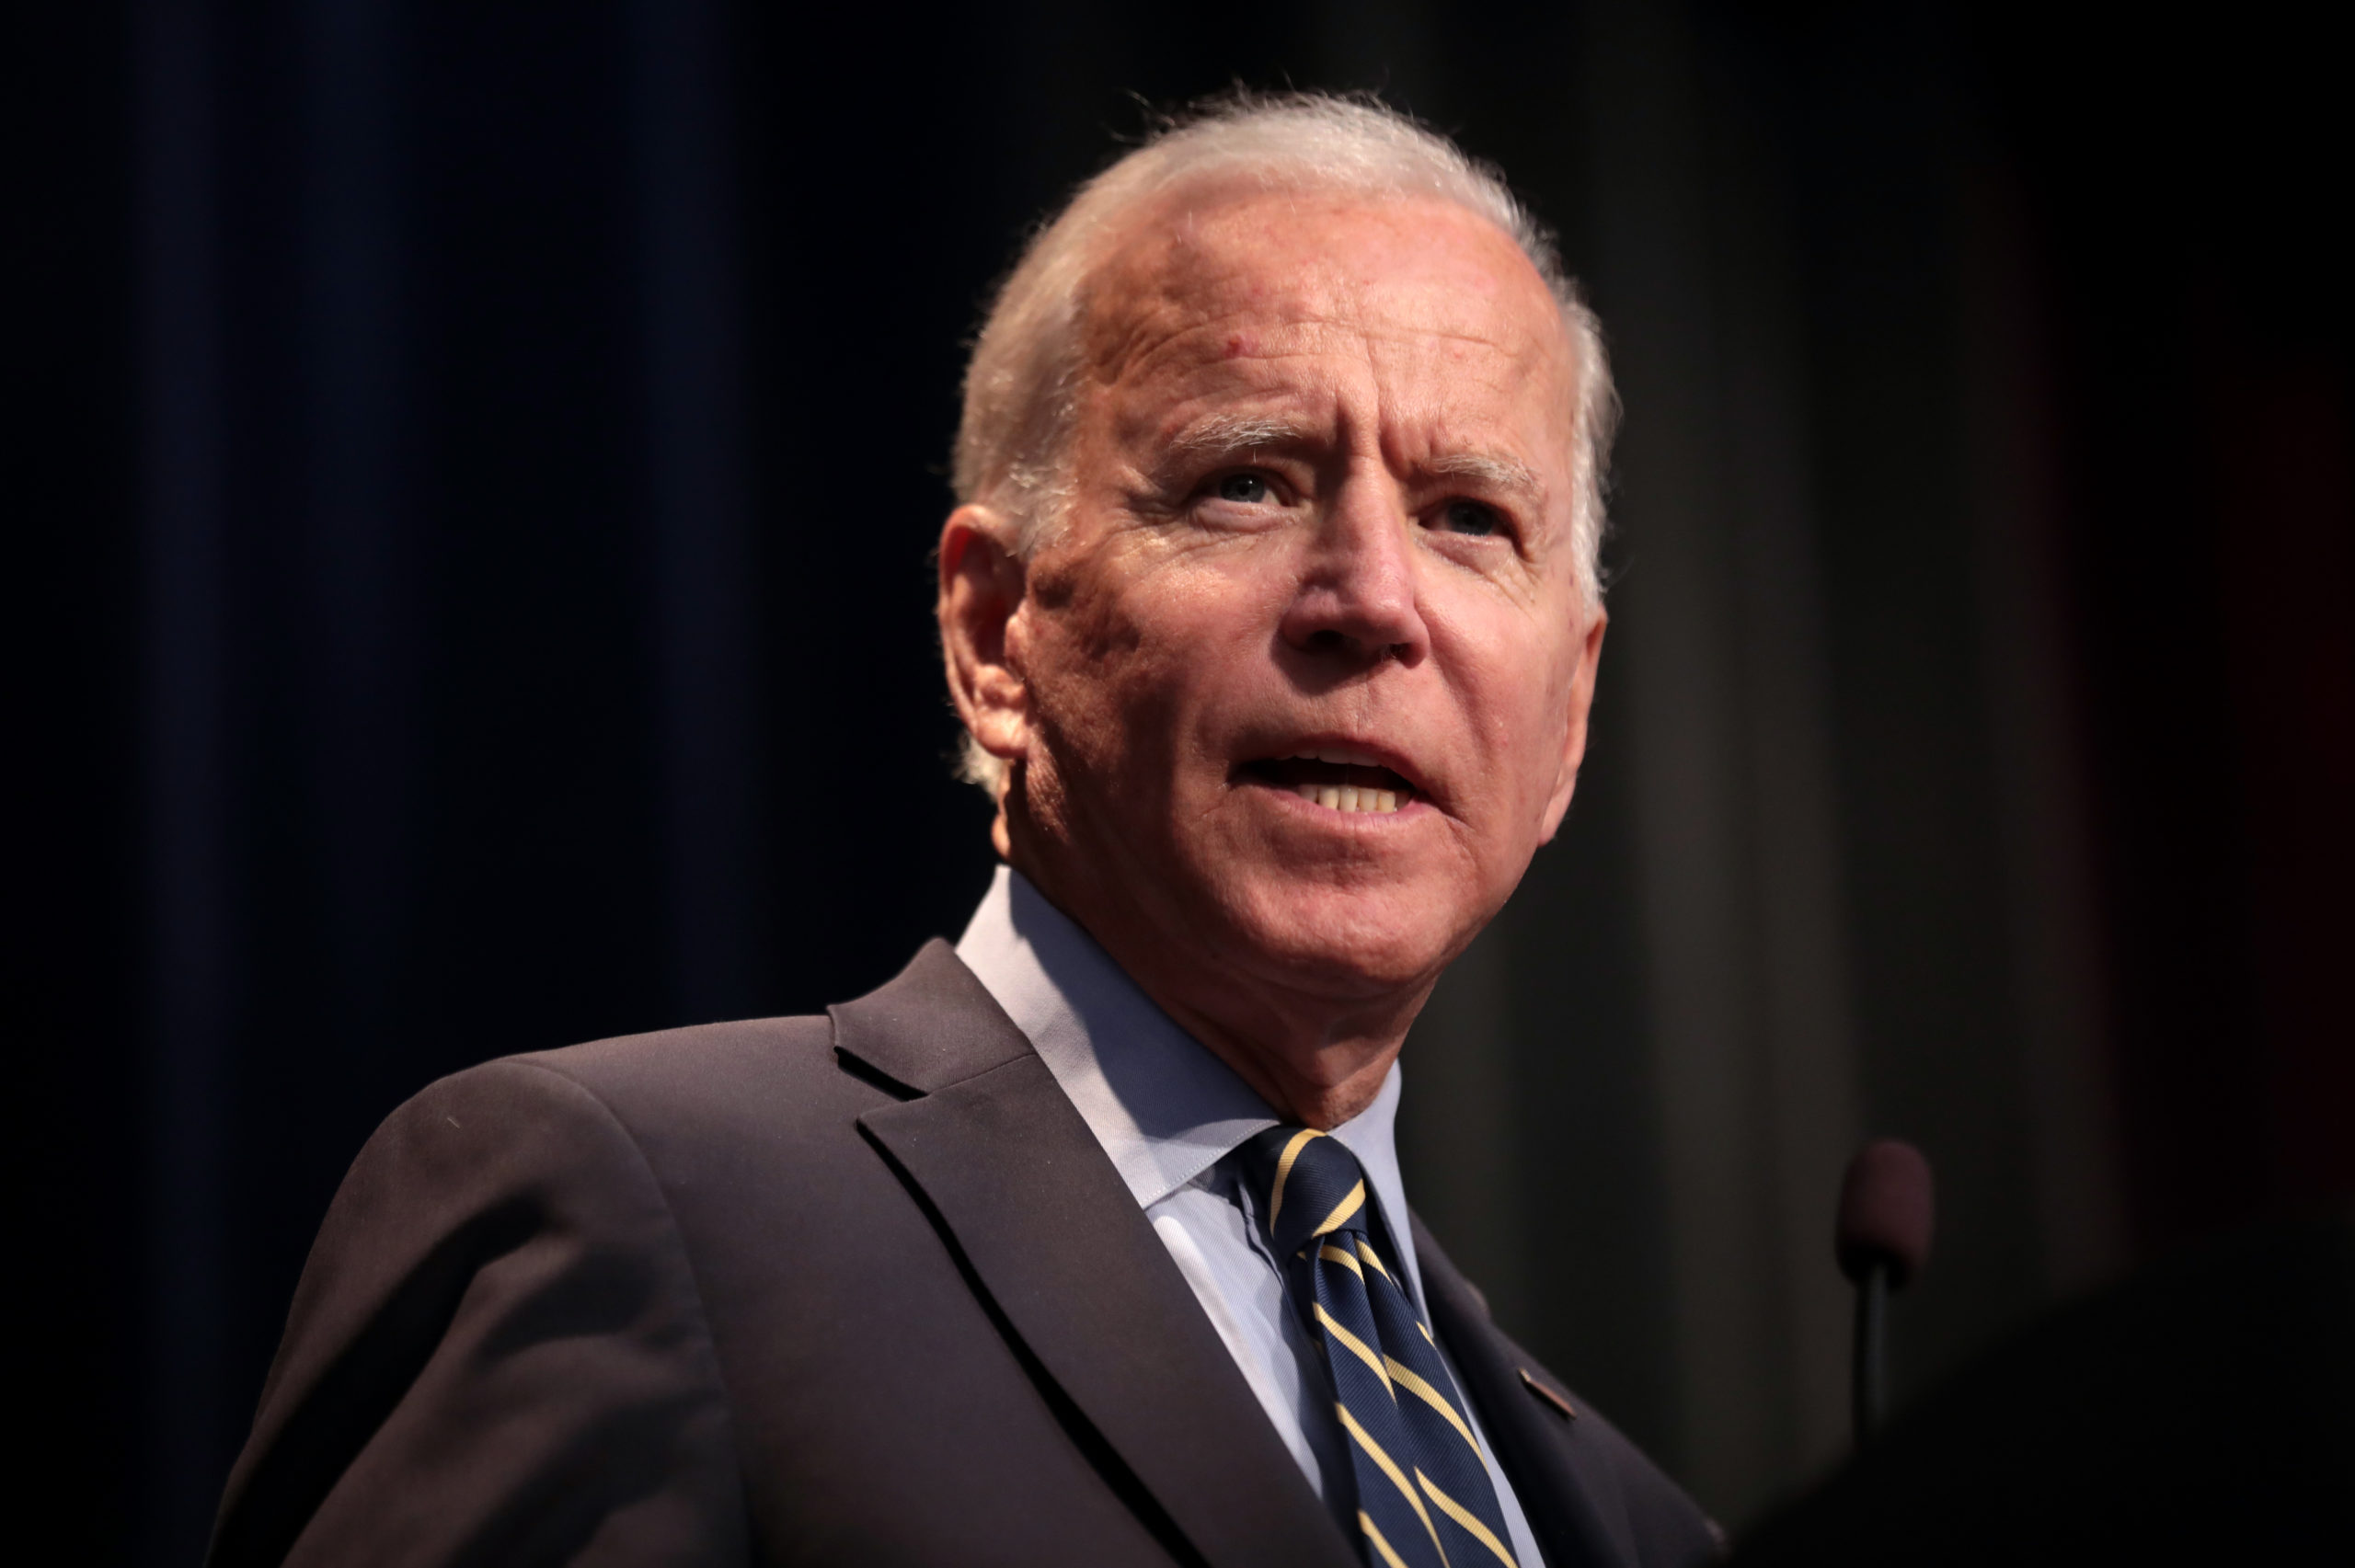 Biden thanks labor for getting him elected